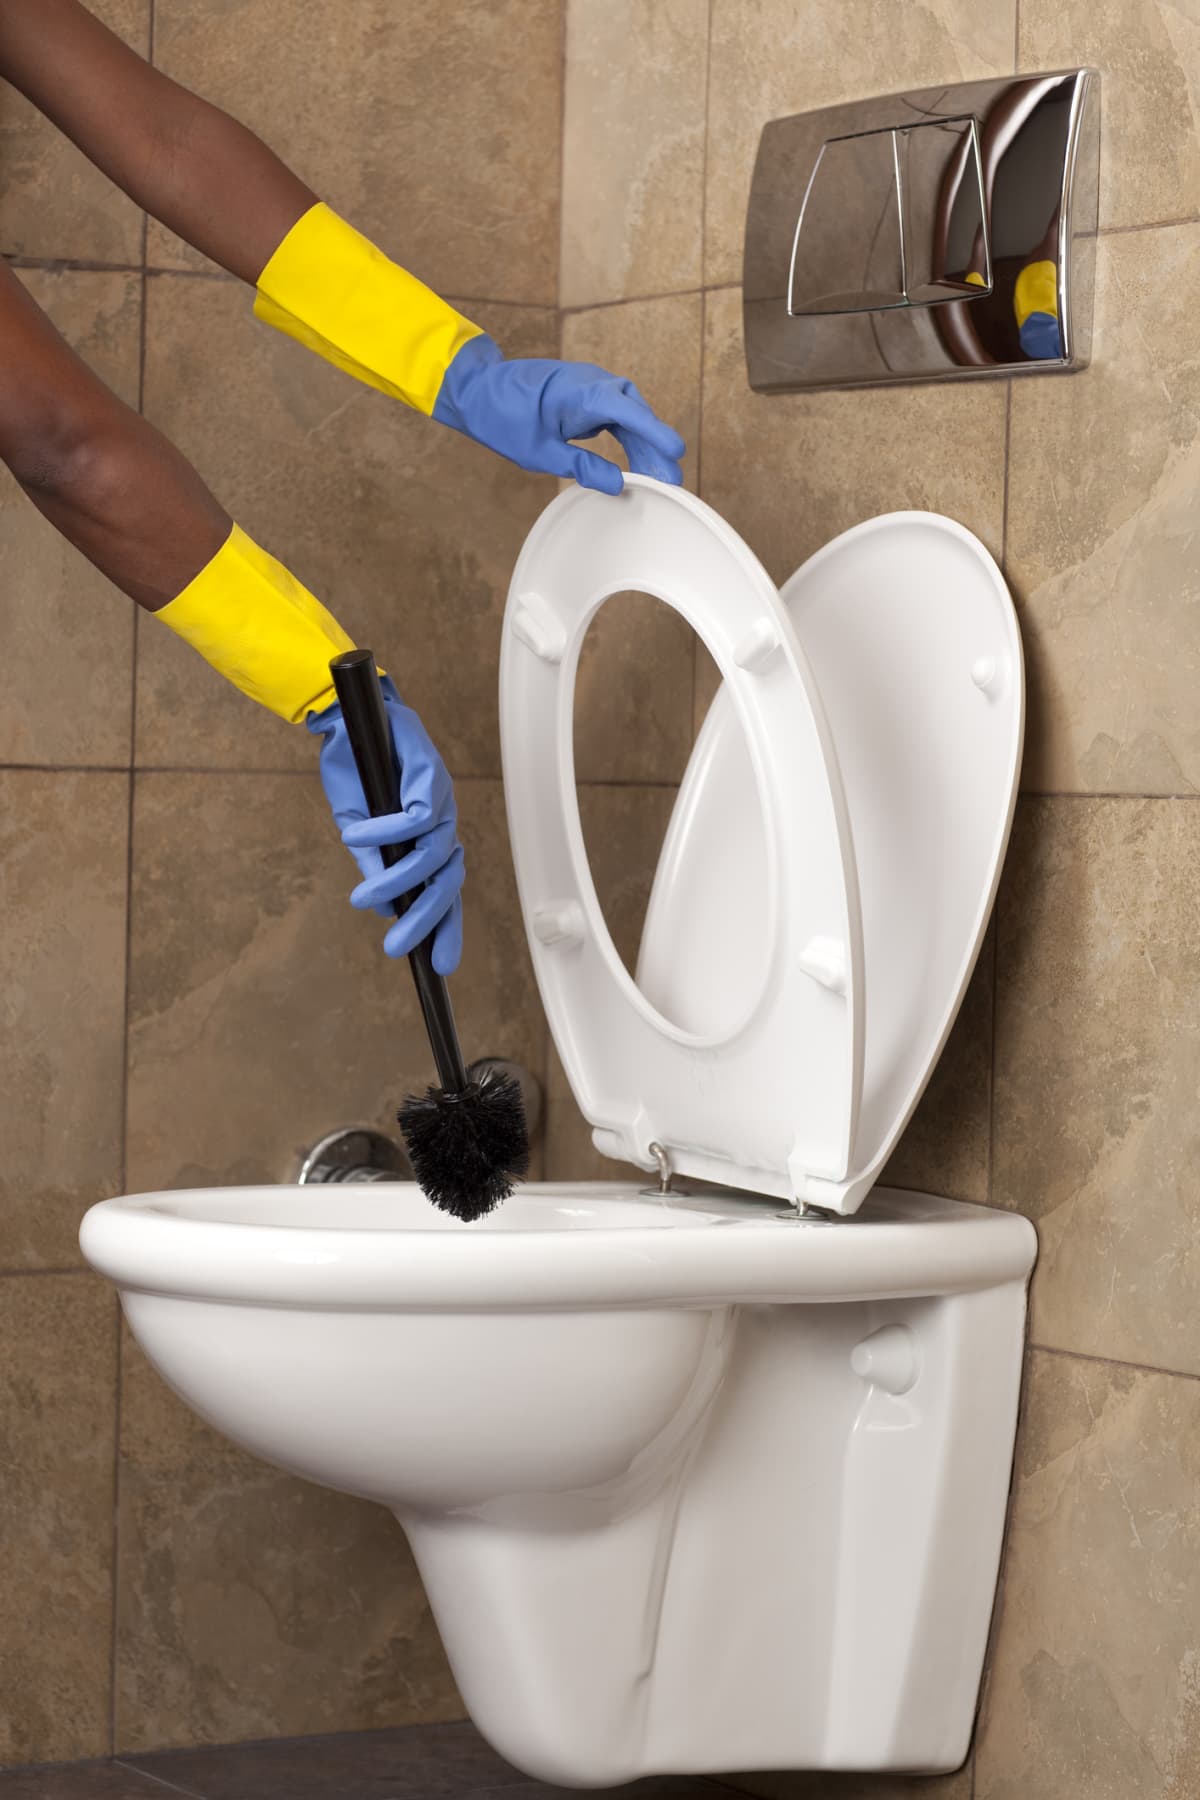 Woman cleaning the toilet.